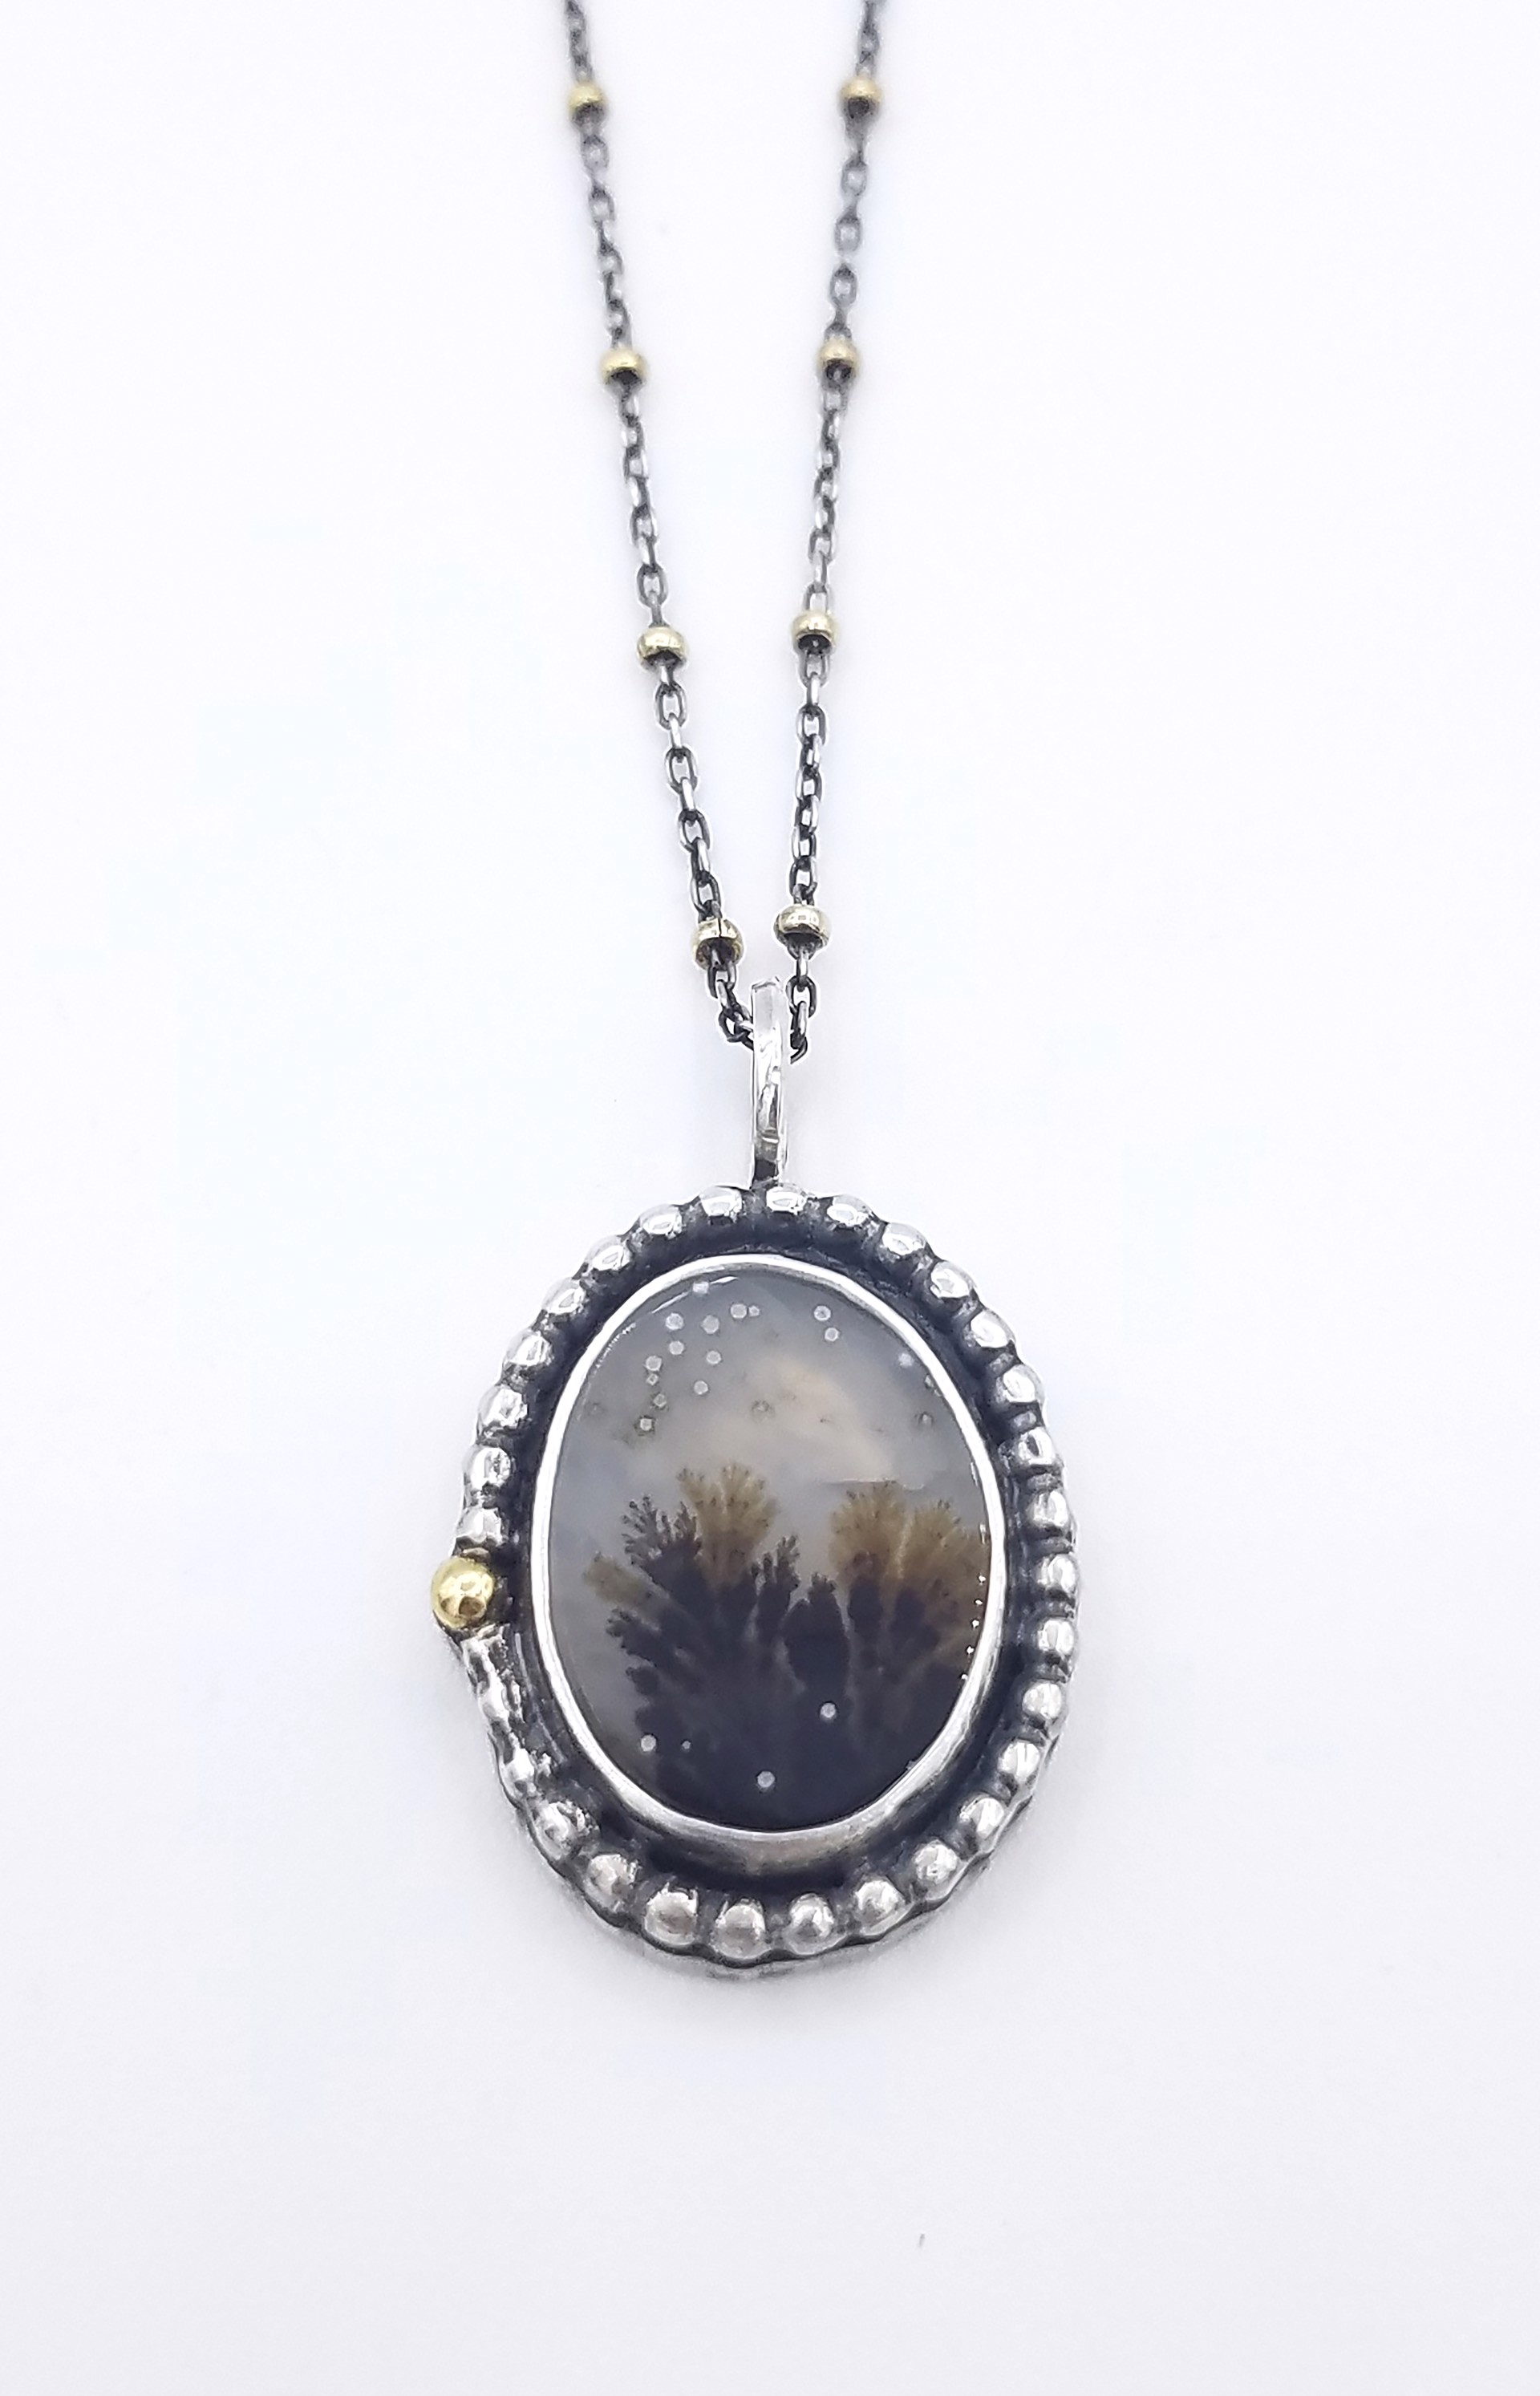 Dendritic Agate Necklace by Anita Shuler